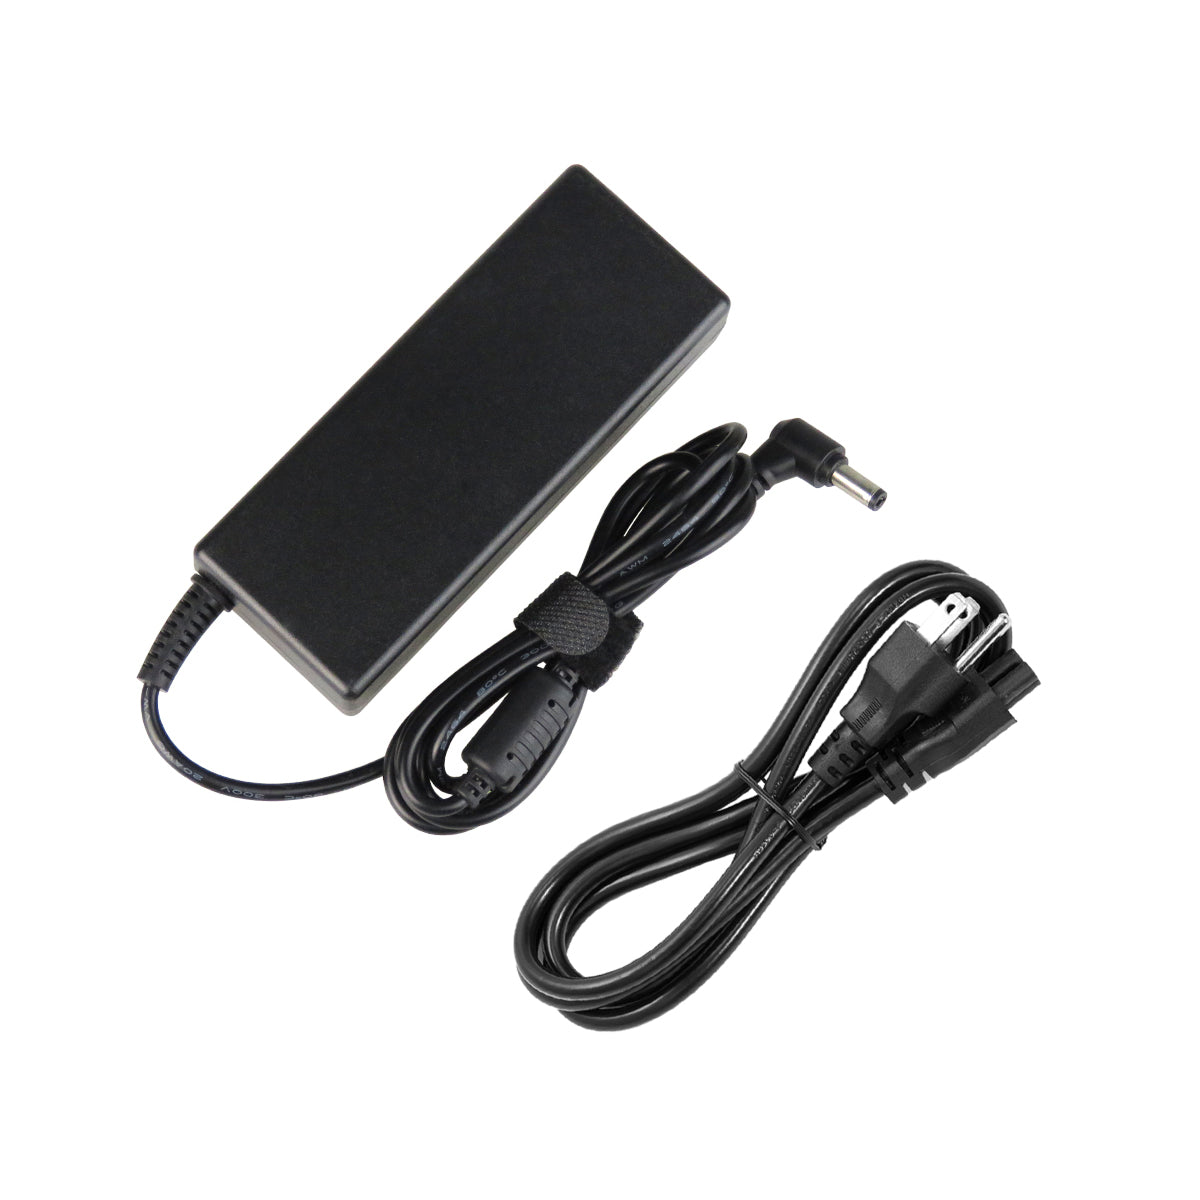 AC Adapter Charger for ASUS K43BE Notebook.